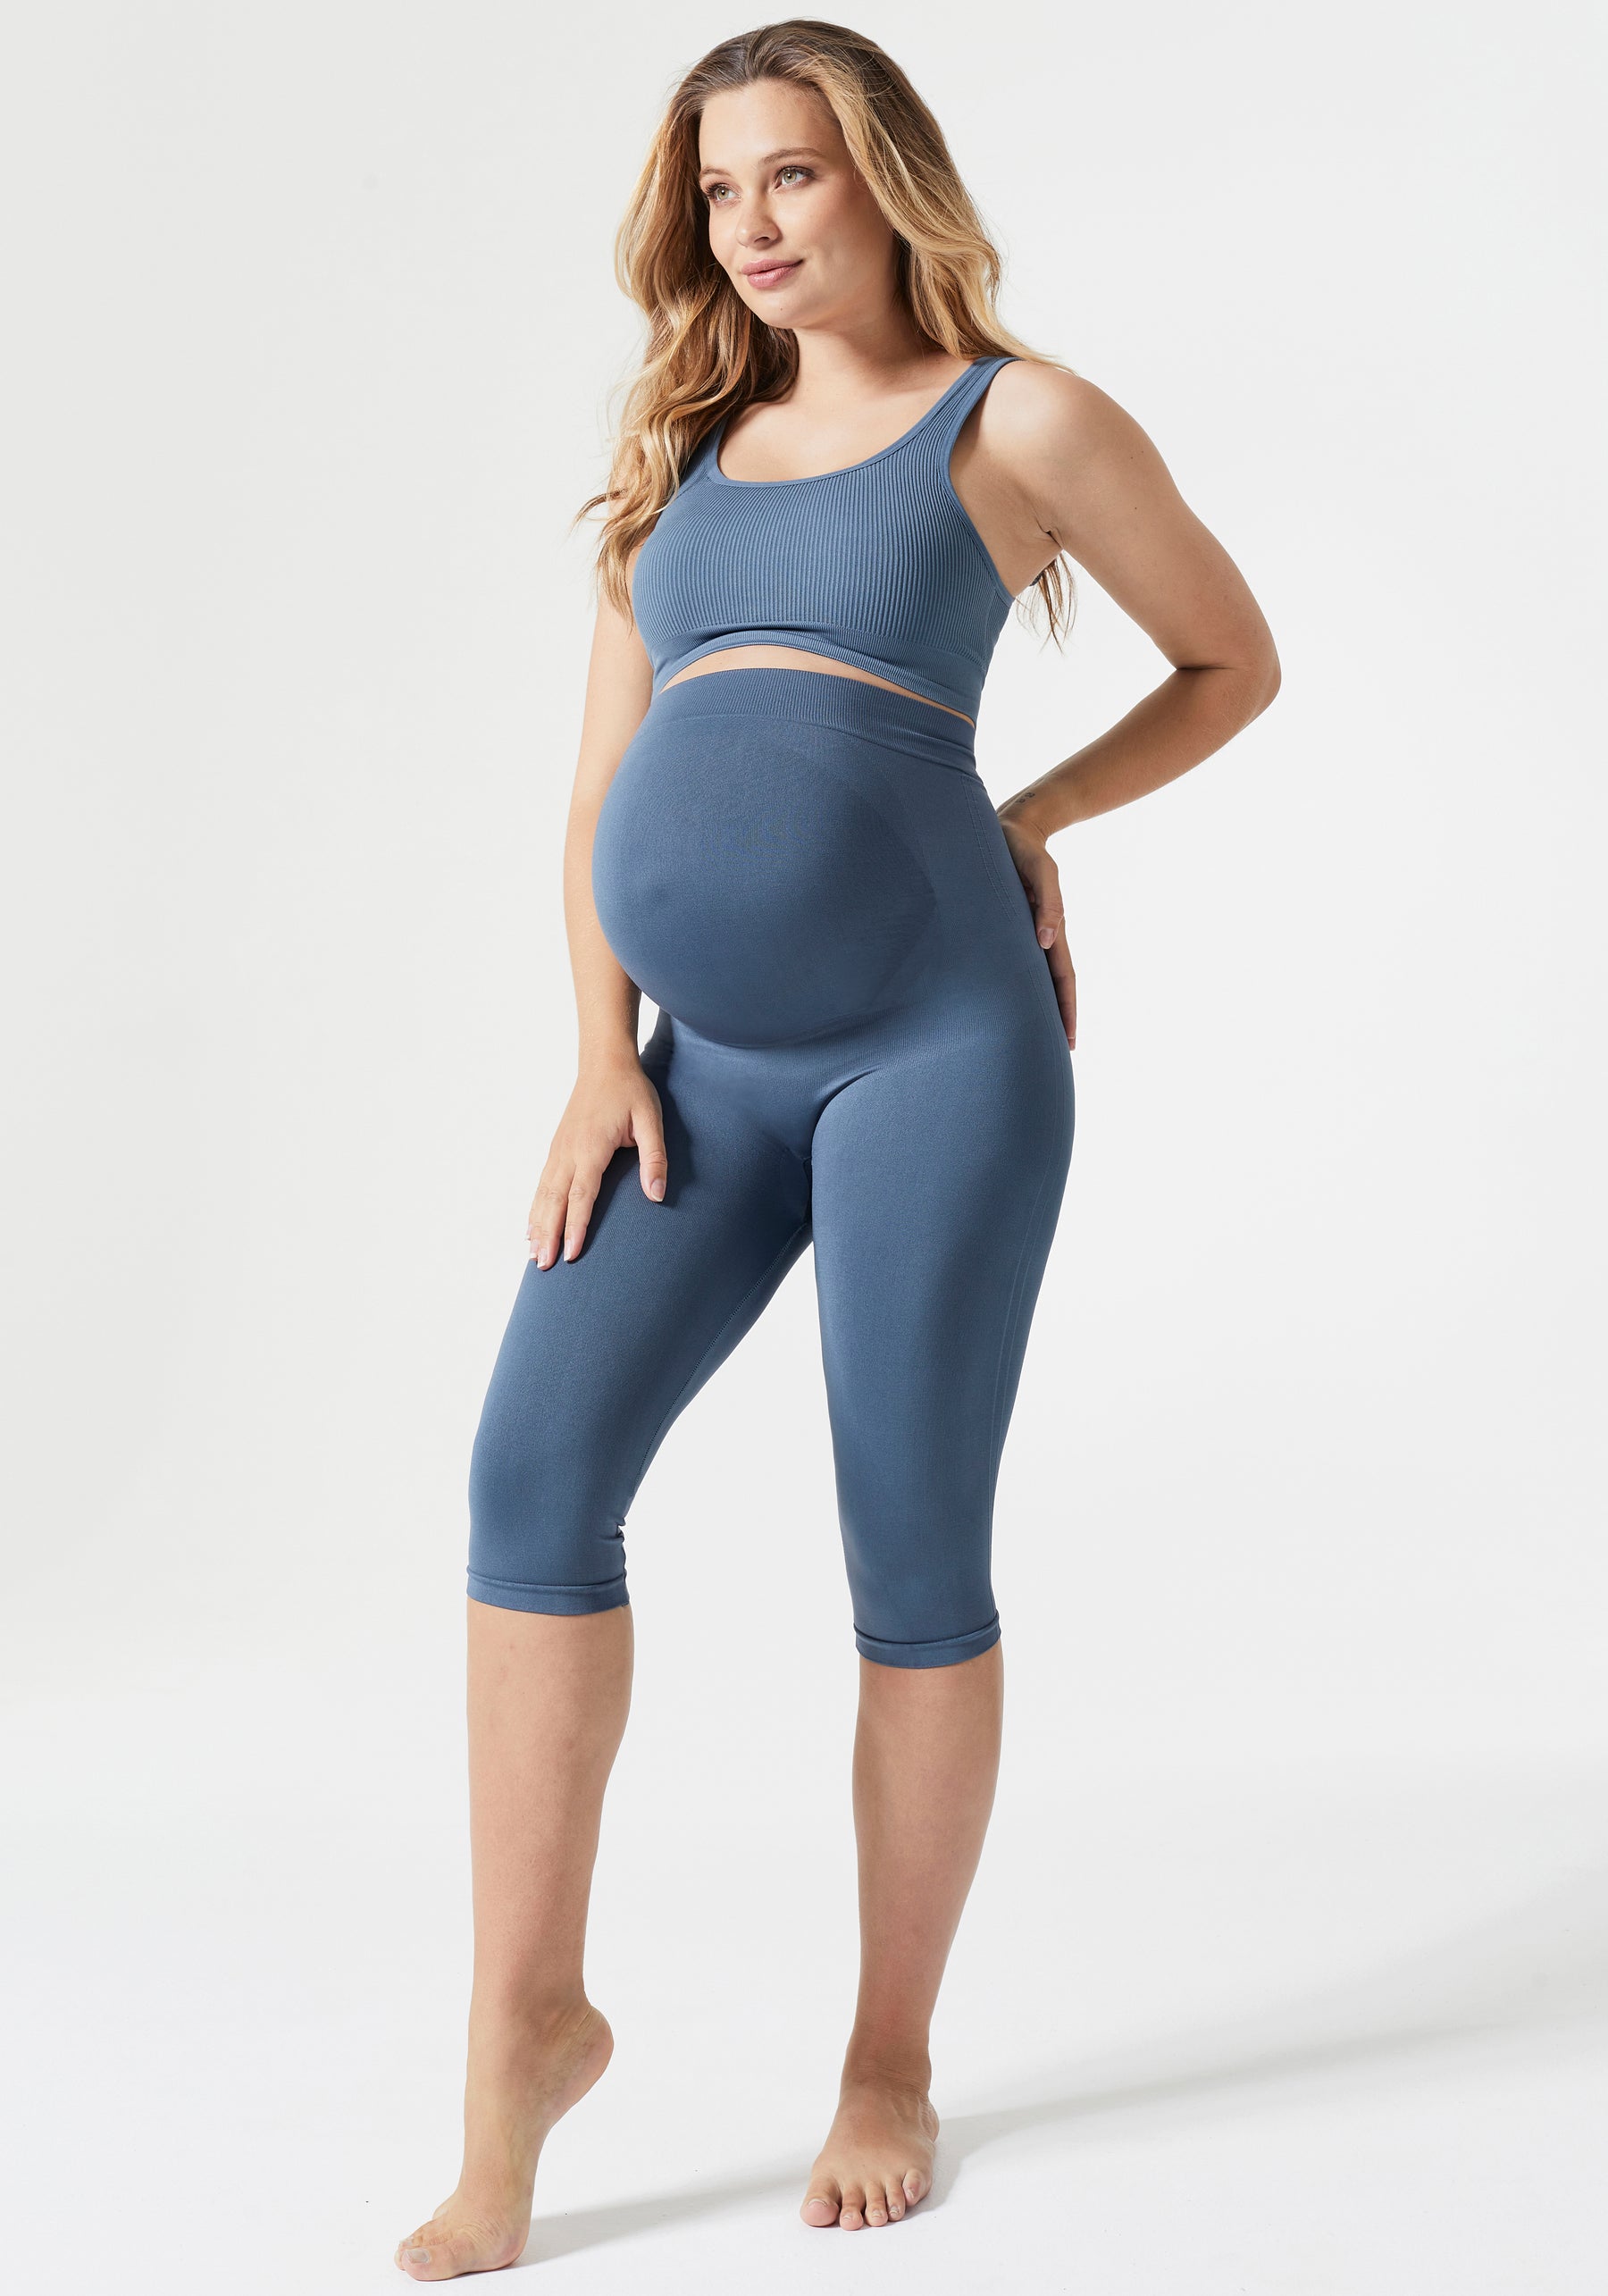 Blanqi Maternity Belly Support Crop Leggings in Black Size Large - $21 -  From Xochipilli